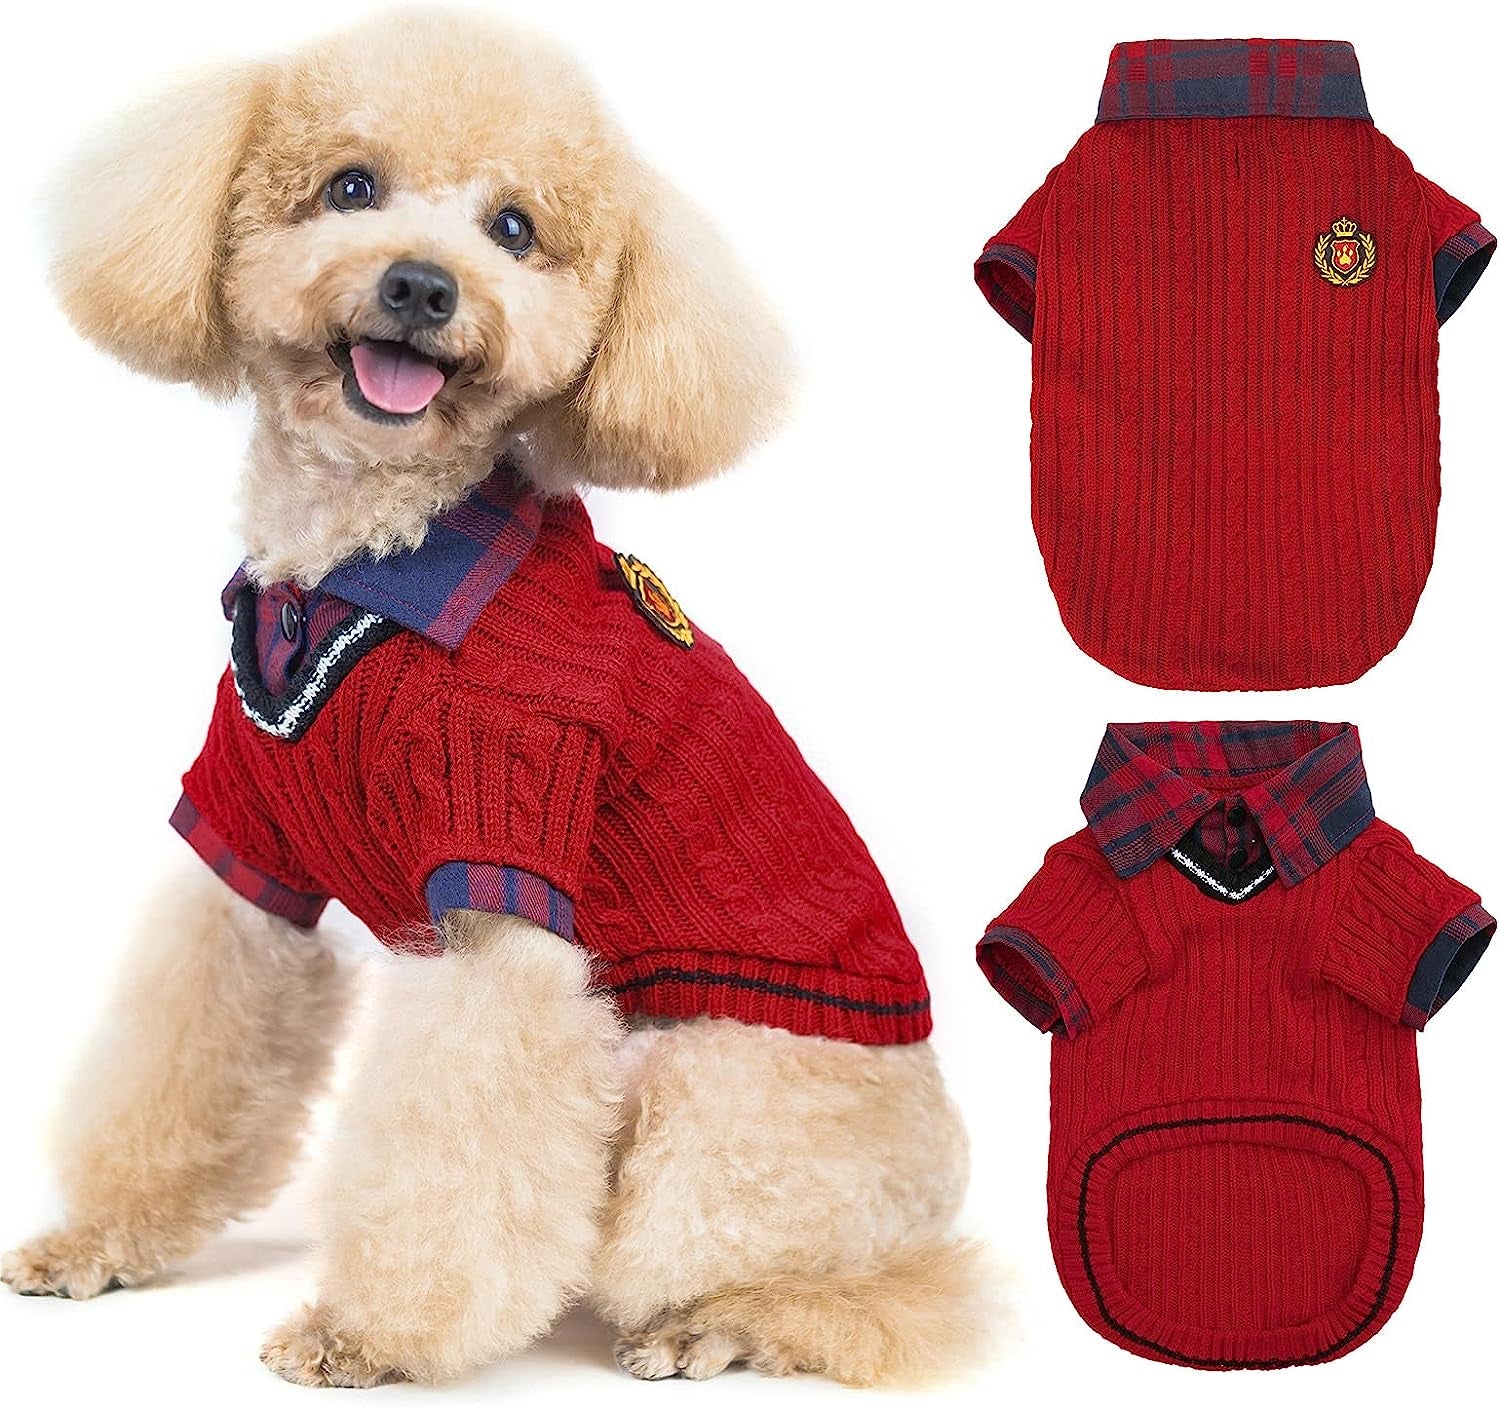  PUPTECK Winter Dog Cat Sweater Coat - Soft Cold